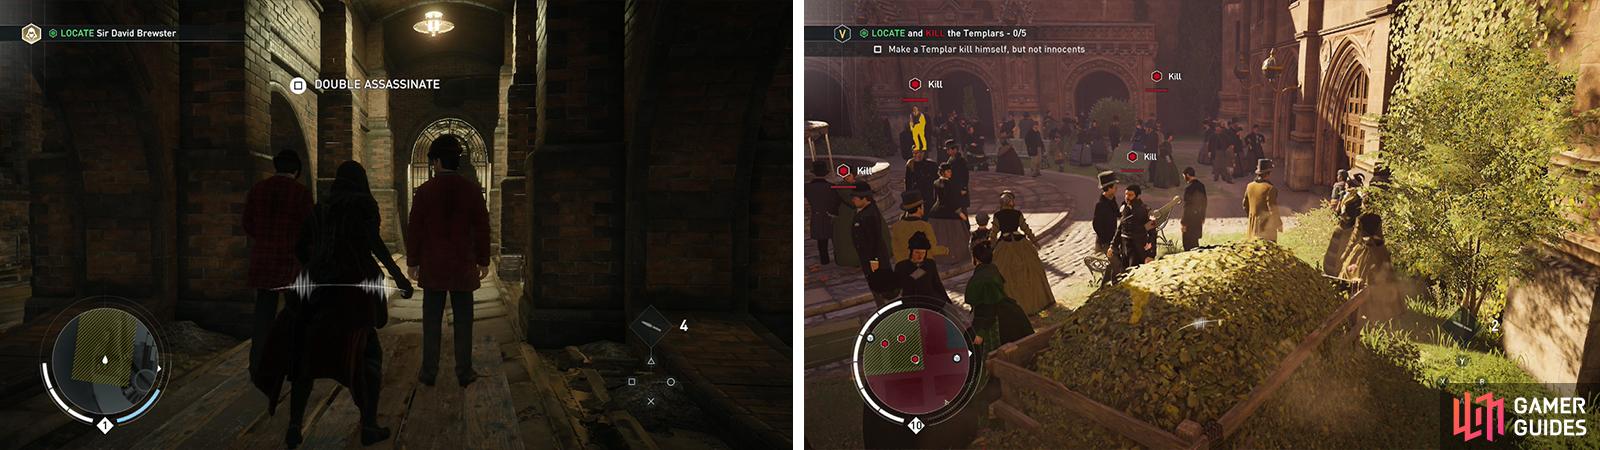 Approach a pair of enemies to perform a double assassination (left). Assassinating from a hiding spot is a great way to deal with patrolling enemies (right).